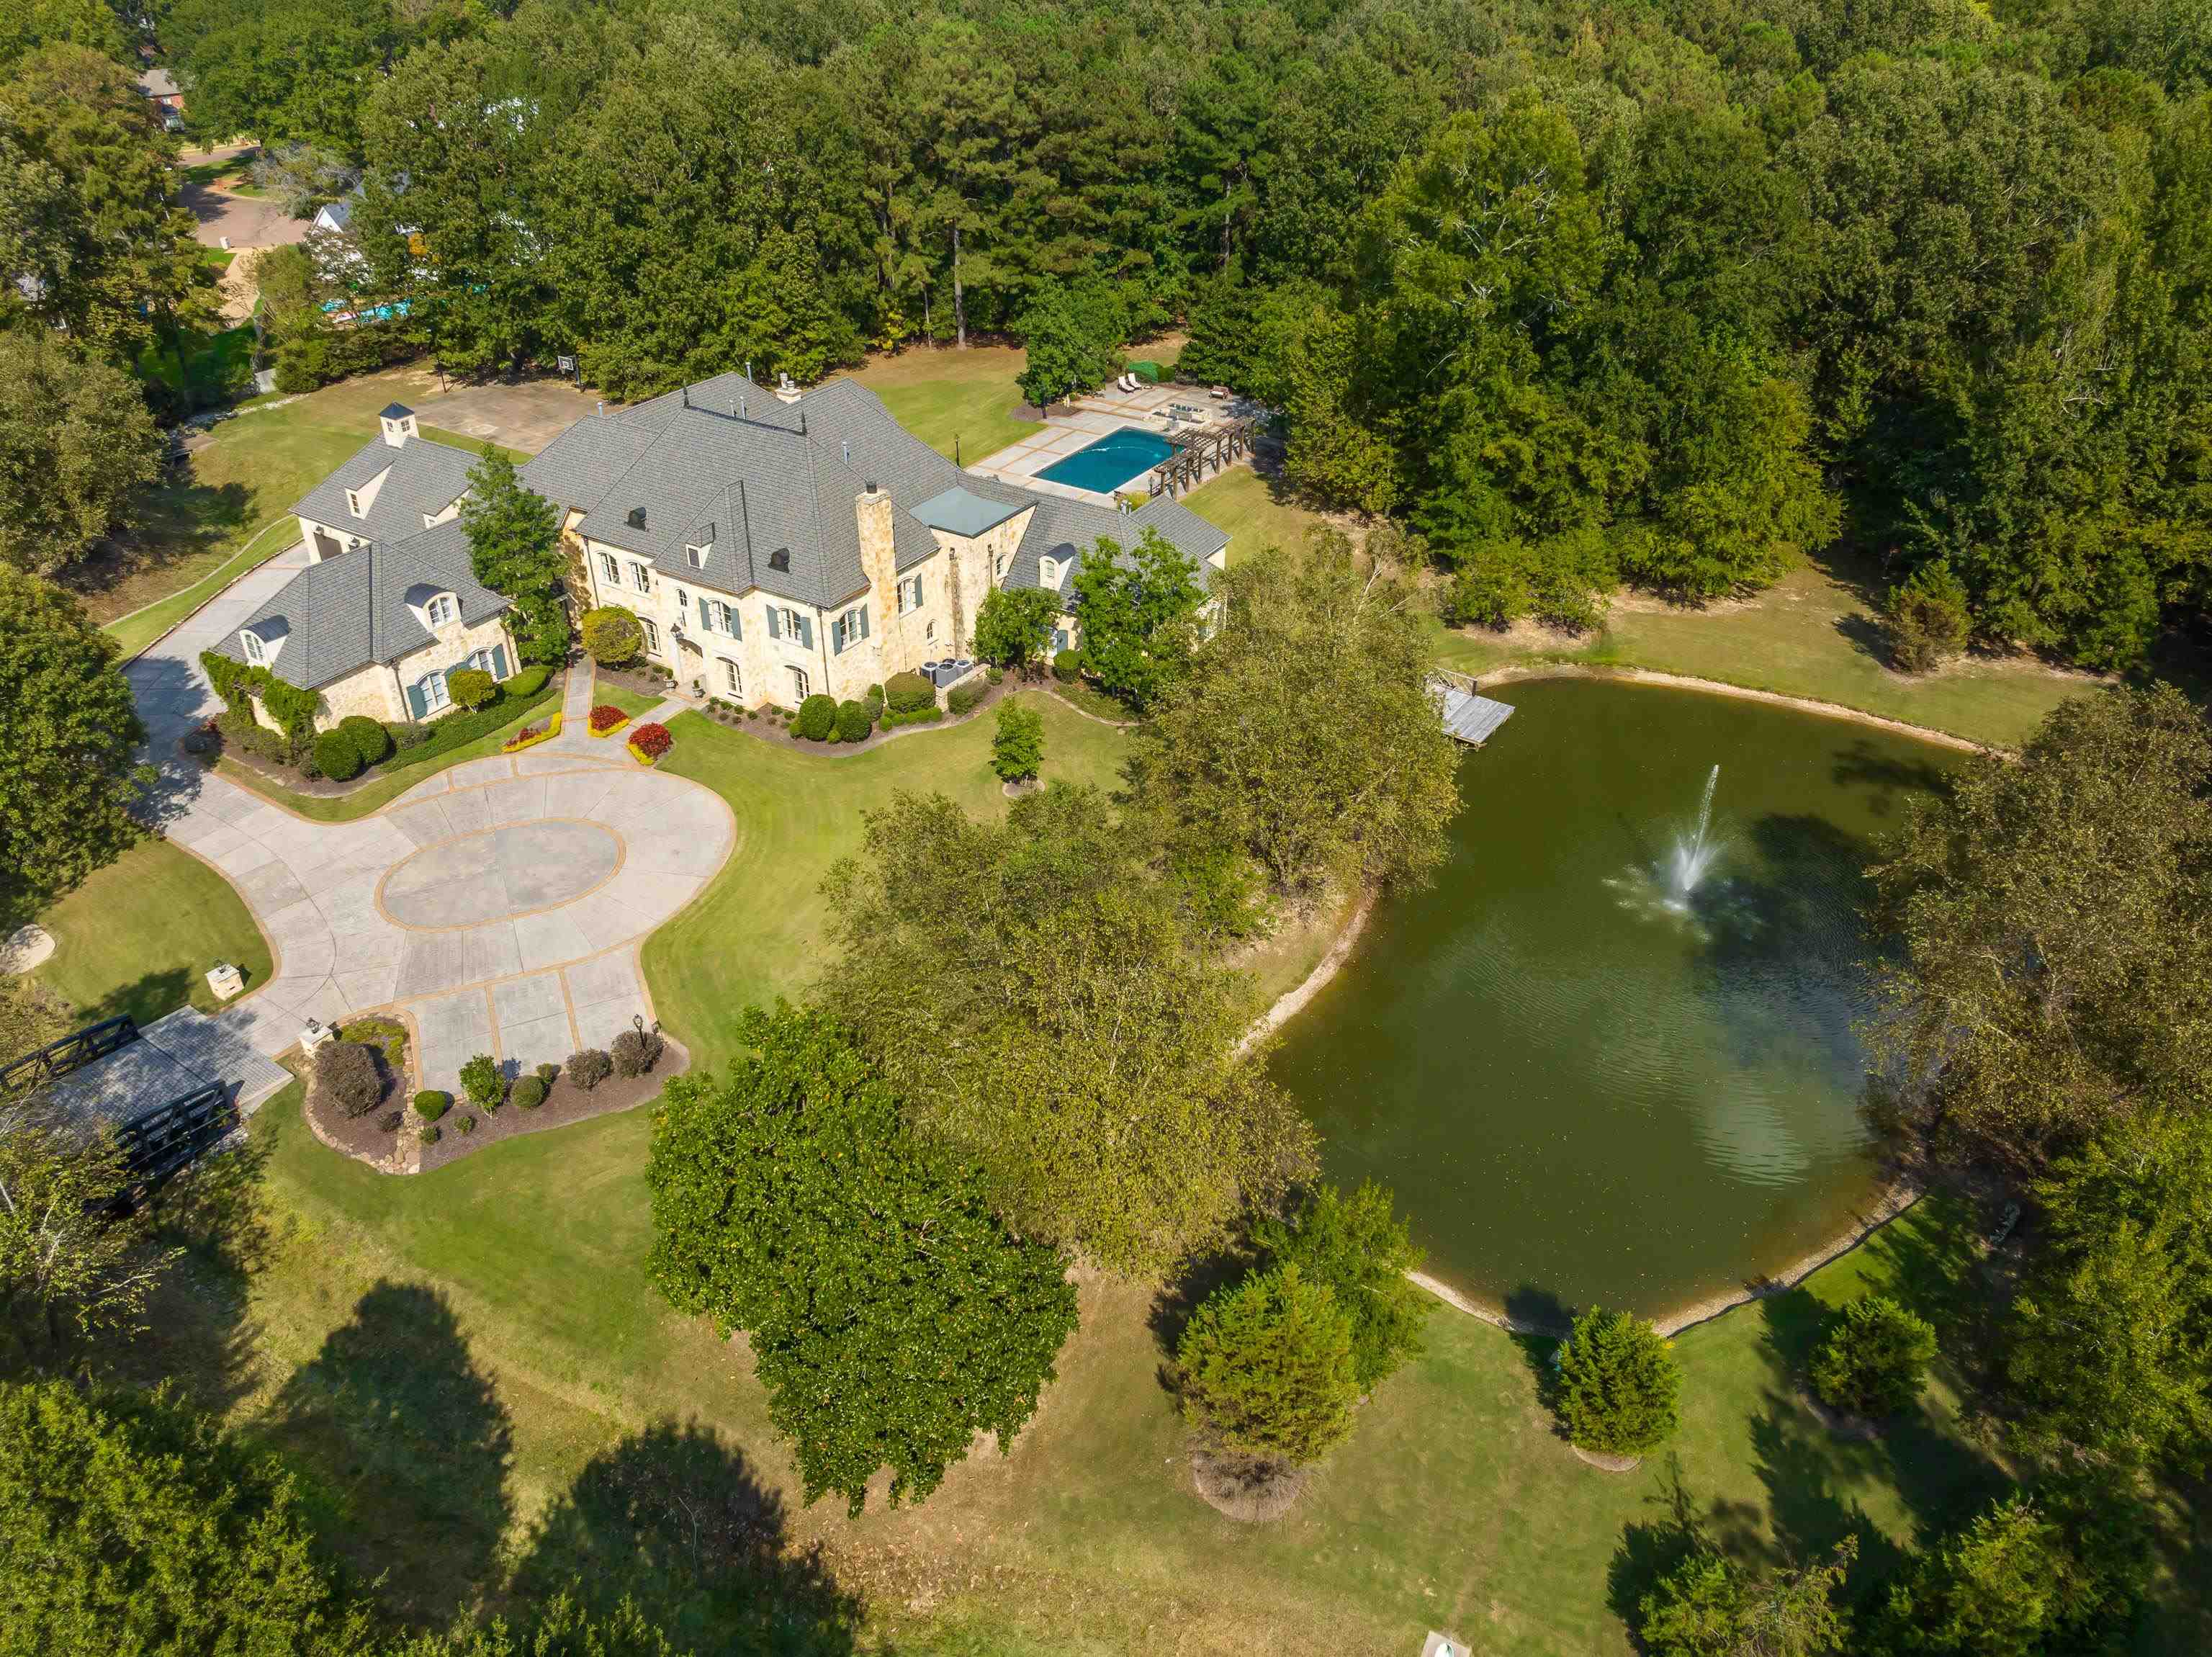 Extremely Rare Opportunity to own a 9+/- acre ultra-private, gated Germantown estate w/pool, endearing pond, generator, & even platted for a second home on the property. Features incl beamed entry w/floating spiral staircase, world class primary kitchen + caterer's kitchen w/Wolf appls, FPs in the LR, GR, & porch, spacious primary suite w/soaking tub & frameless glass shower, 36x25 gym w/16' ceil, media rm, 40’x23’ vaullted, beamed scrn cooking porch, pool & hot tub, pond w/fountain, & more.